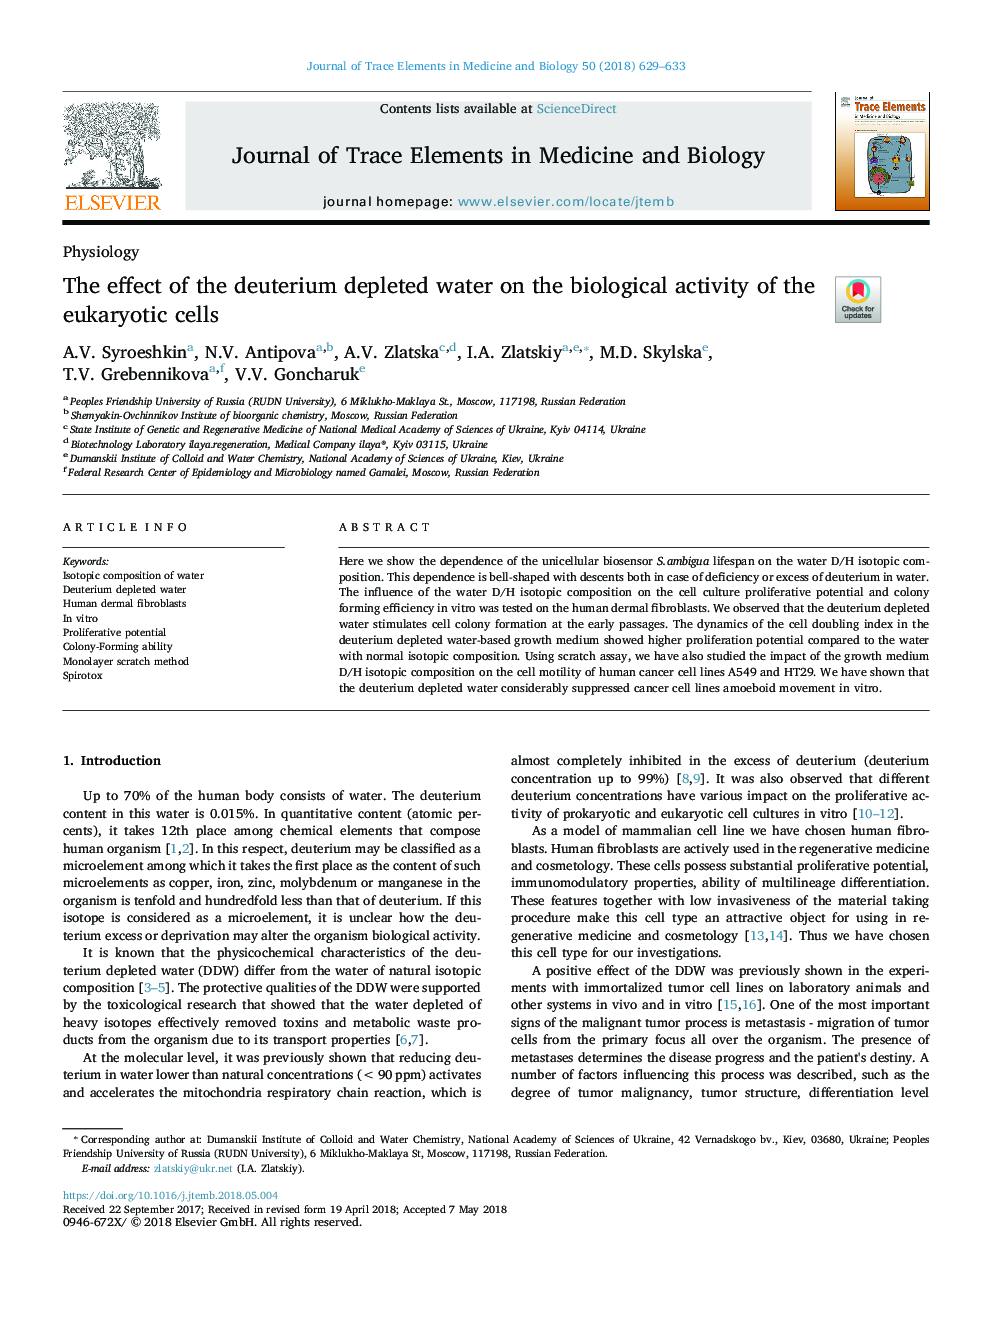 The effect of the deuterium depleted water on the biological activity of the eukaryotic cells